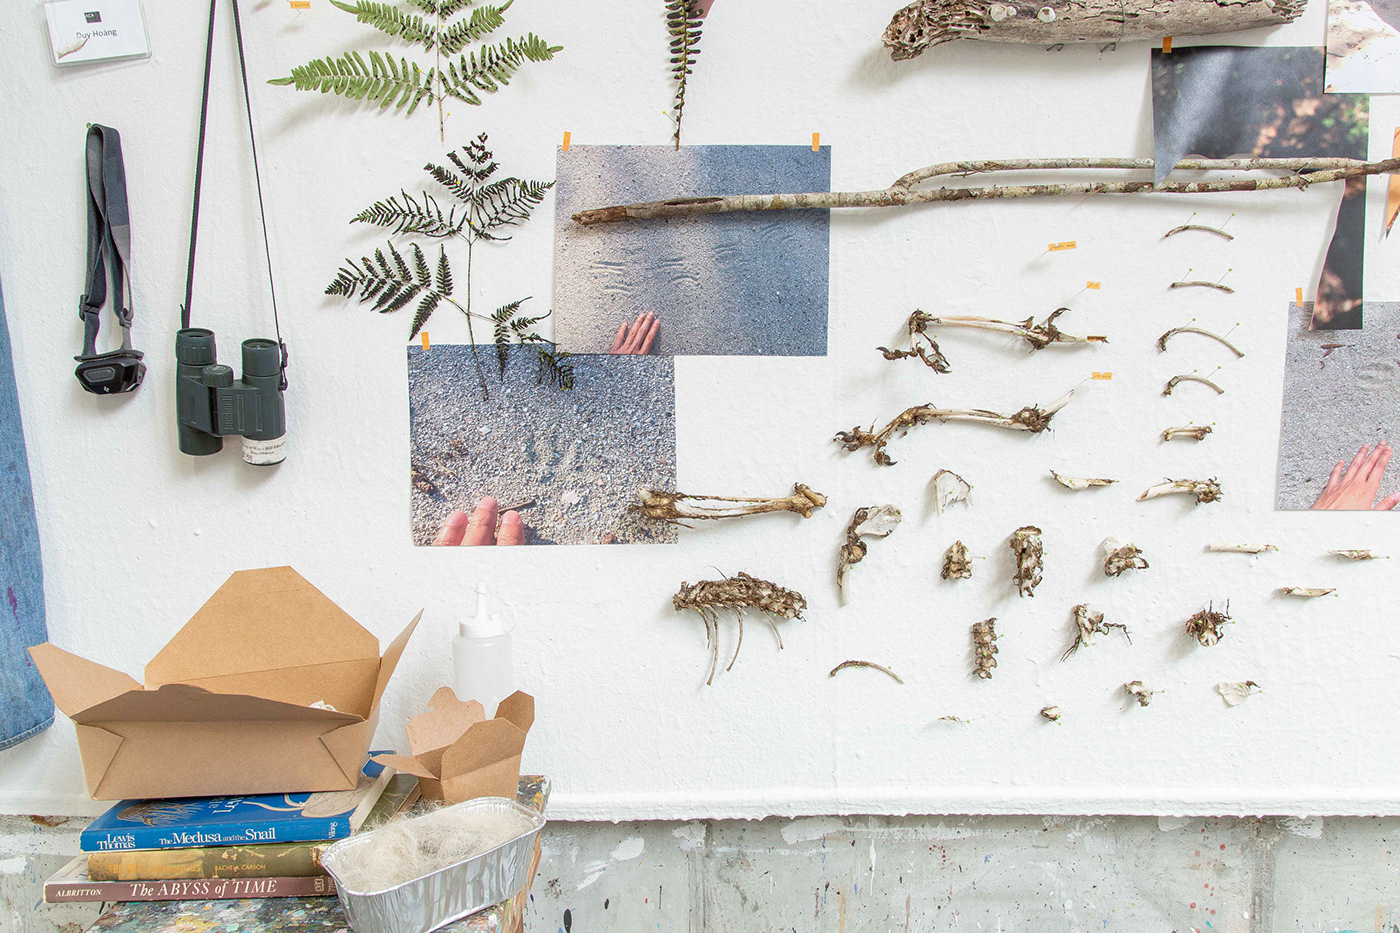 botany Field work Insects installation mixed media natural history Nature specimens